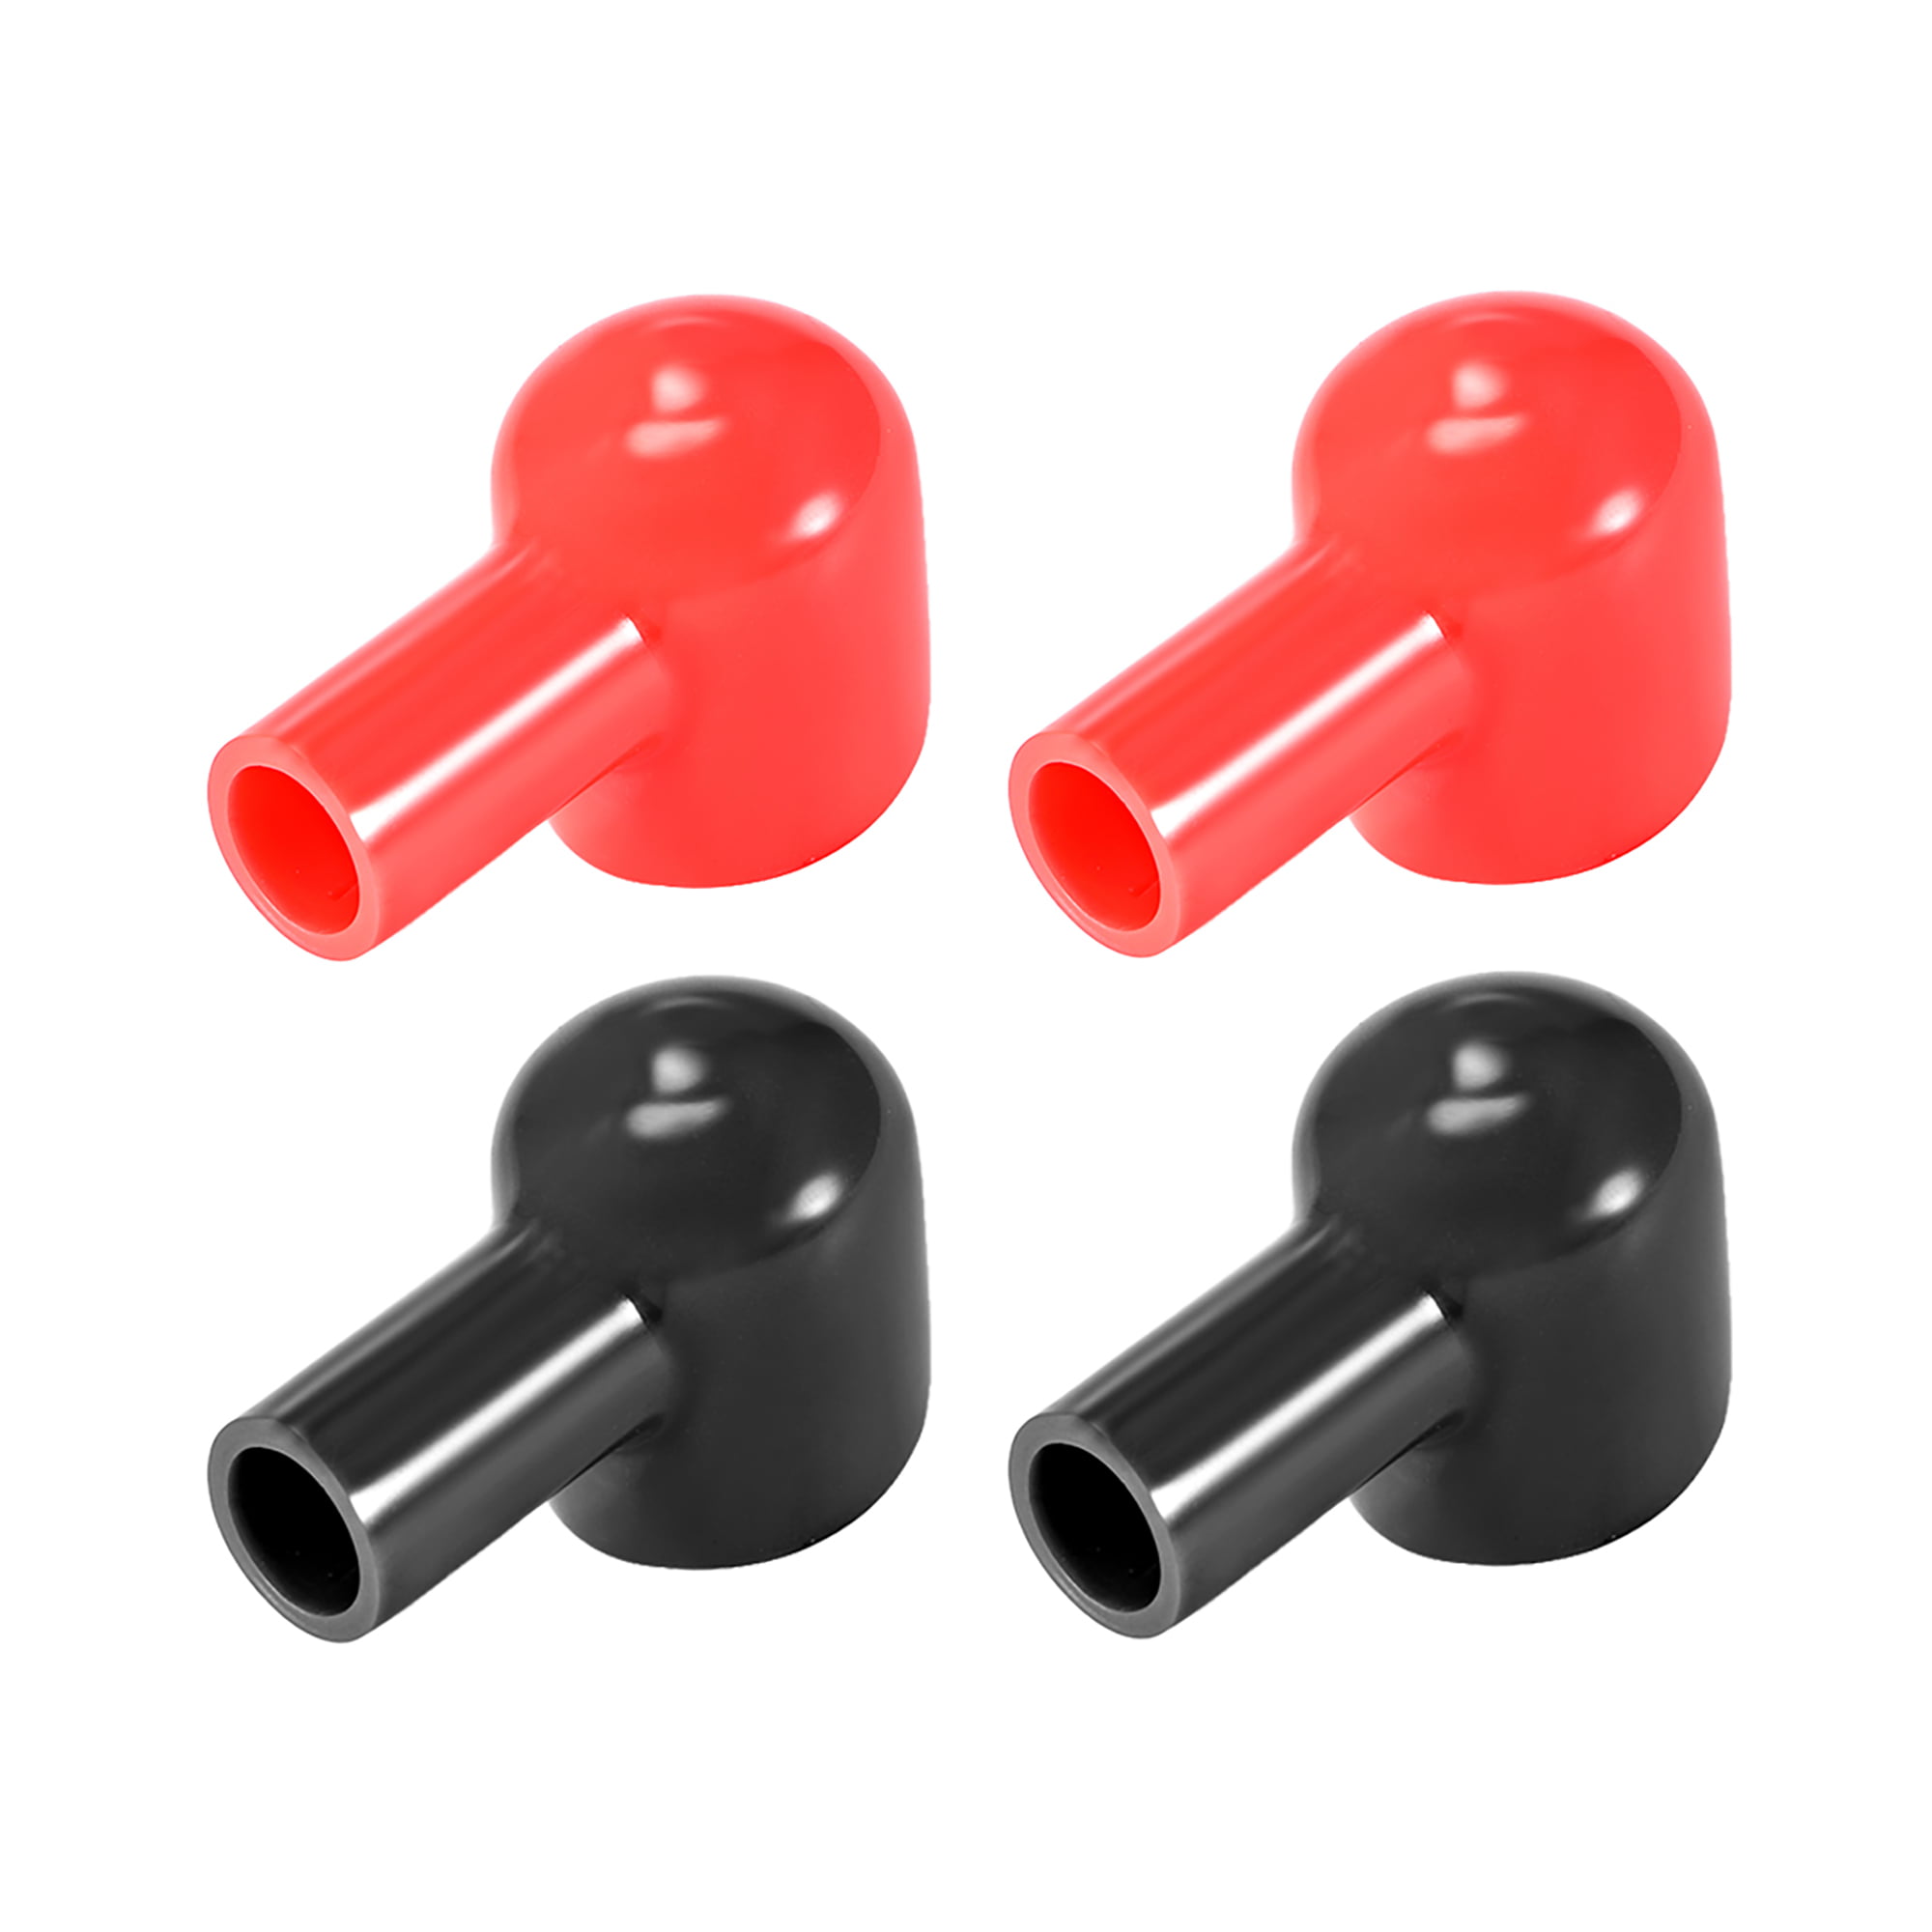 Details about   Battery Terminal Insulating Rubber Protector Covers 20mmx15mm Red Black 5 Pairs